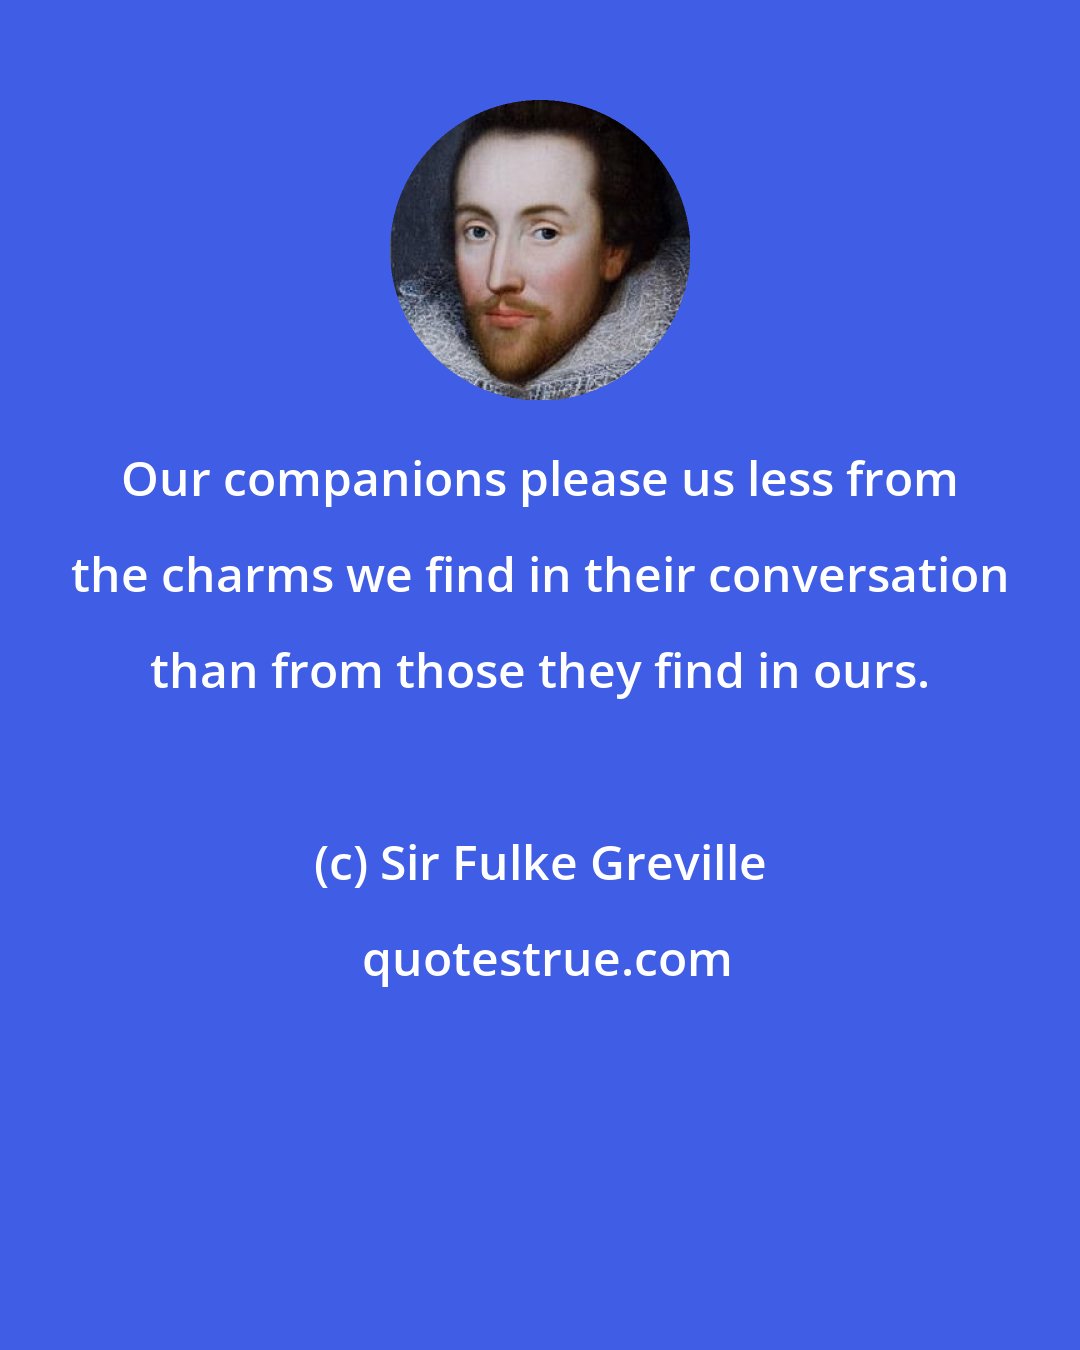 Sir Fulke Greville: Our companions please us less from the charms we find in their conversation than from those they find in ours.